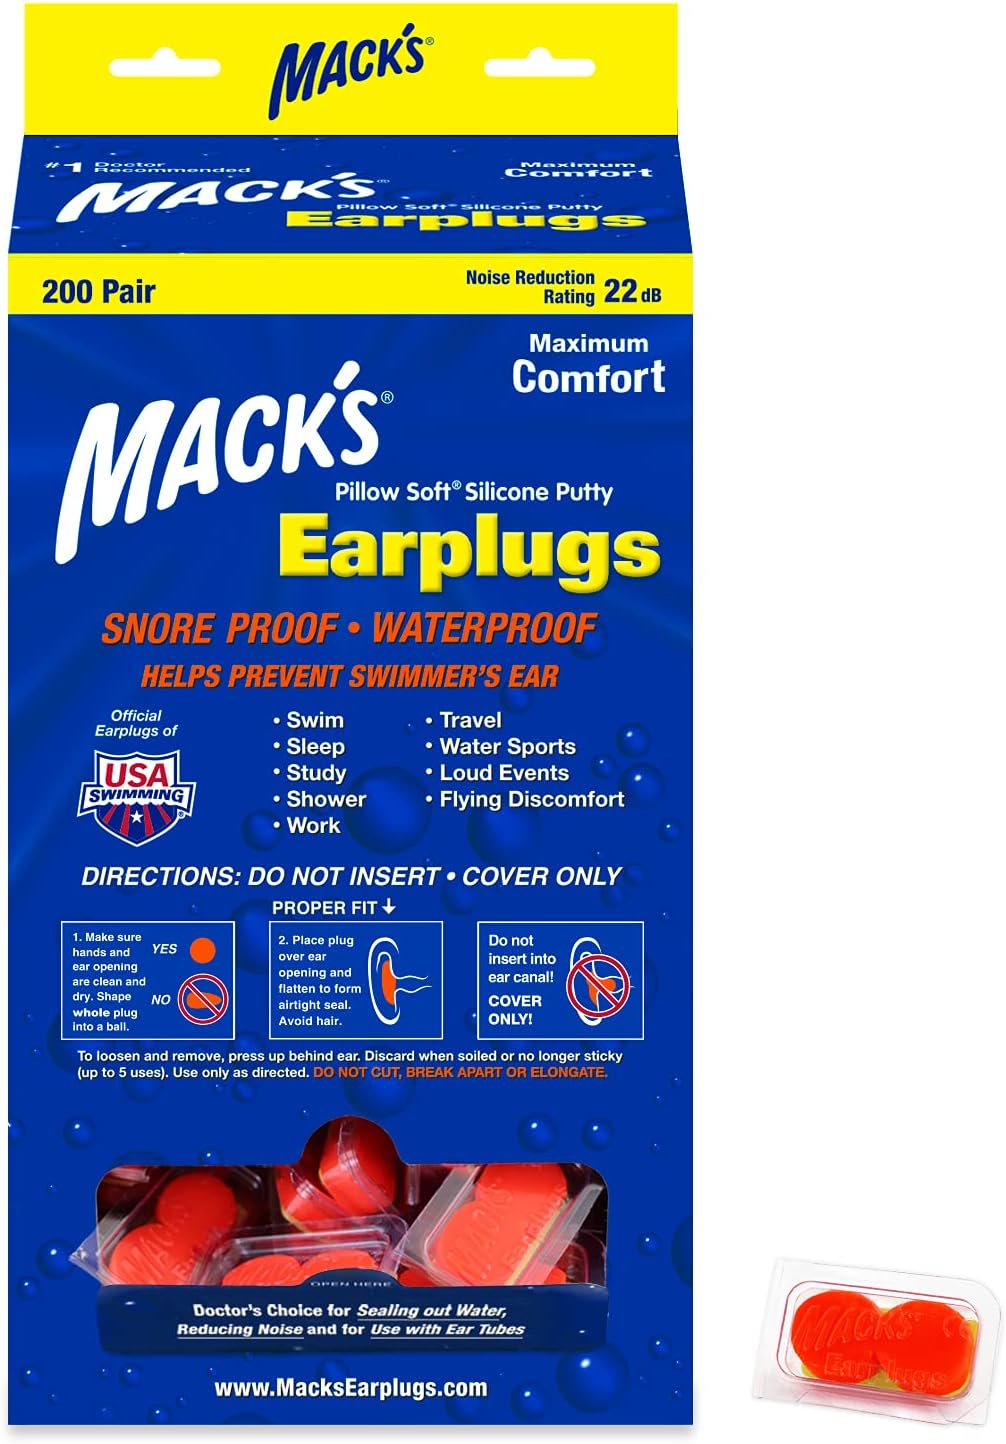 Mack's Pillow Soft Silicone Earplugs - 200 Pair Dispenser - The Original Moldable Silicone Putty Ear Plugs for Sleeping, Snoring, Swimming, Travel, Concerts and Studying (Orange) | Made in USA